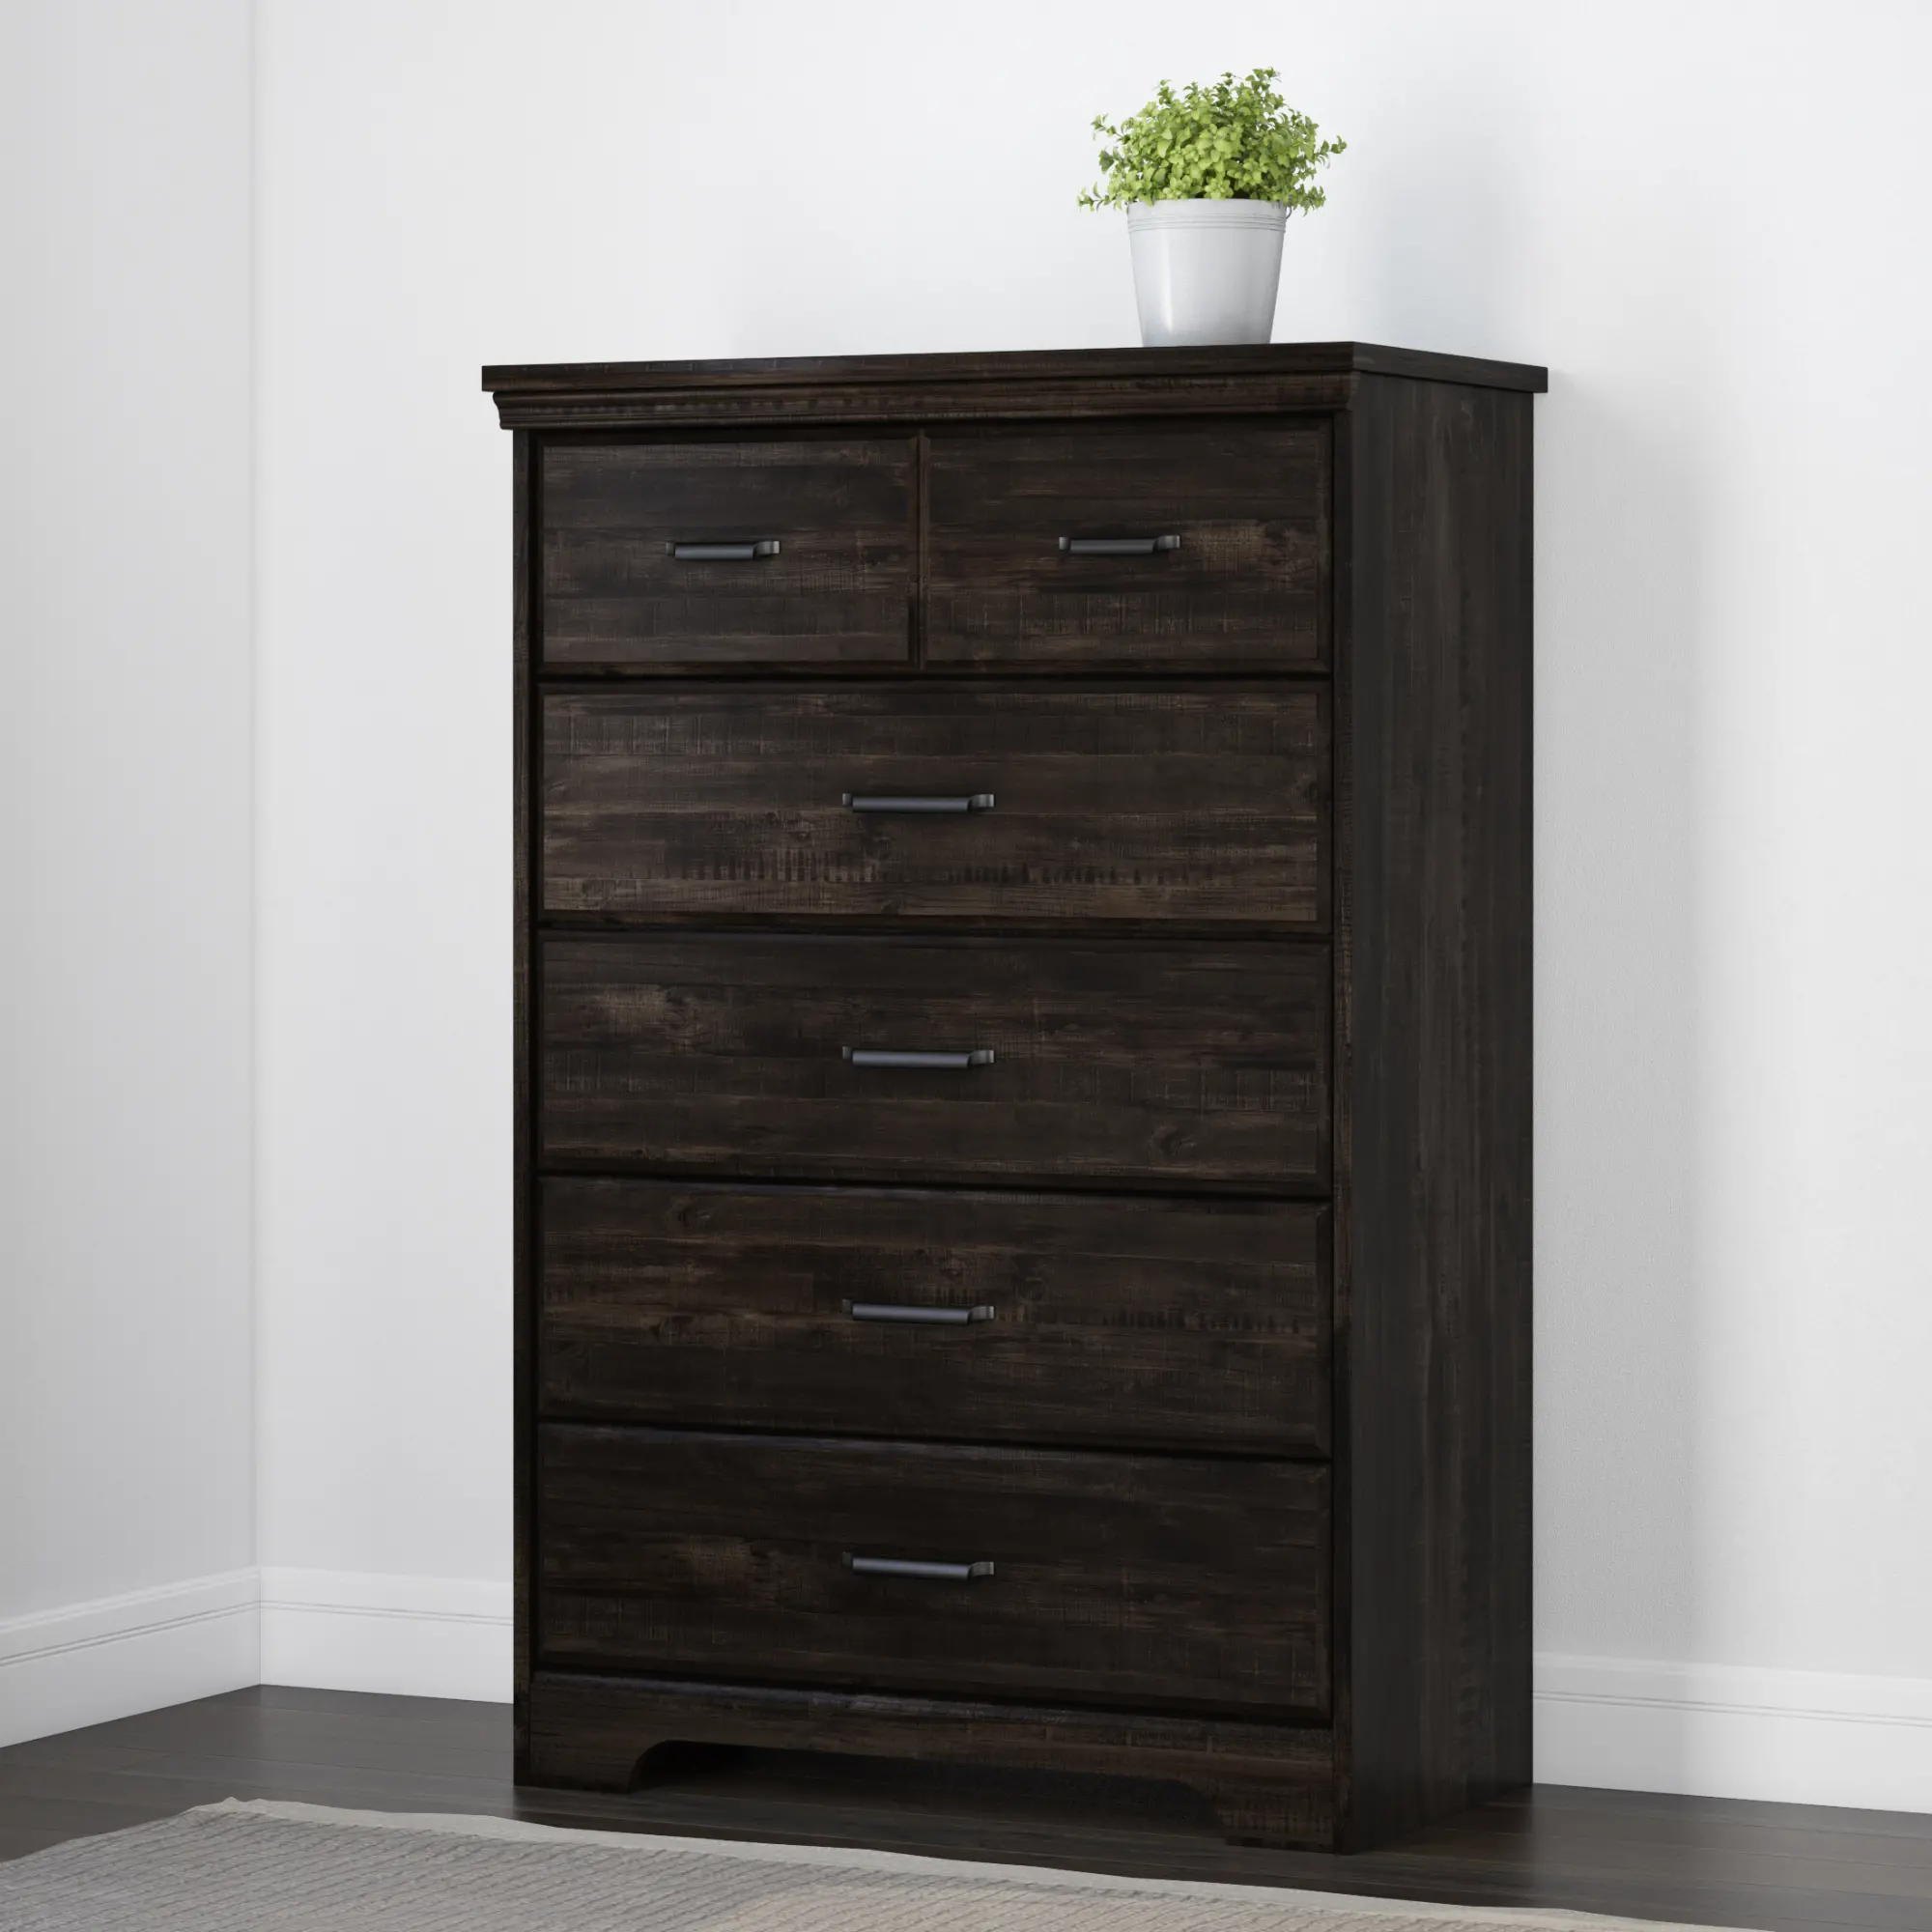 Photos - Dresser / Chests of Drawers South Shore Versa Rubbed Black 5-Drawer Chest - South Shore 13111